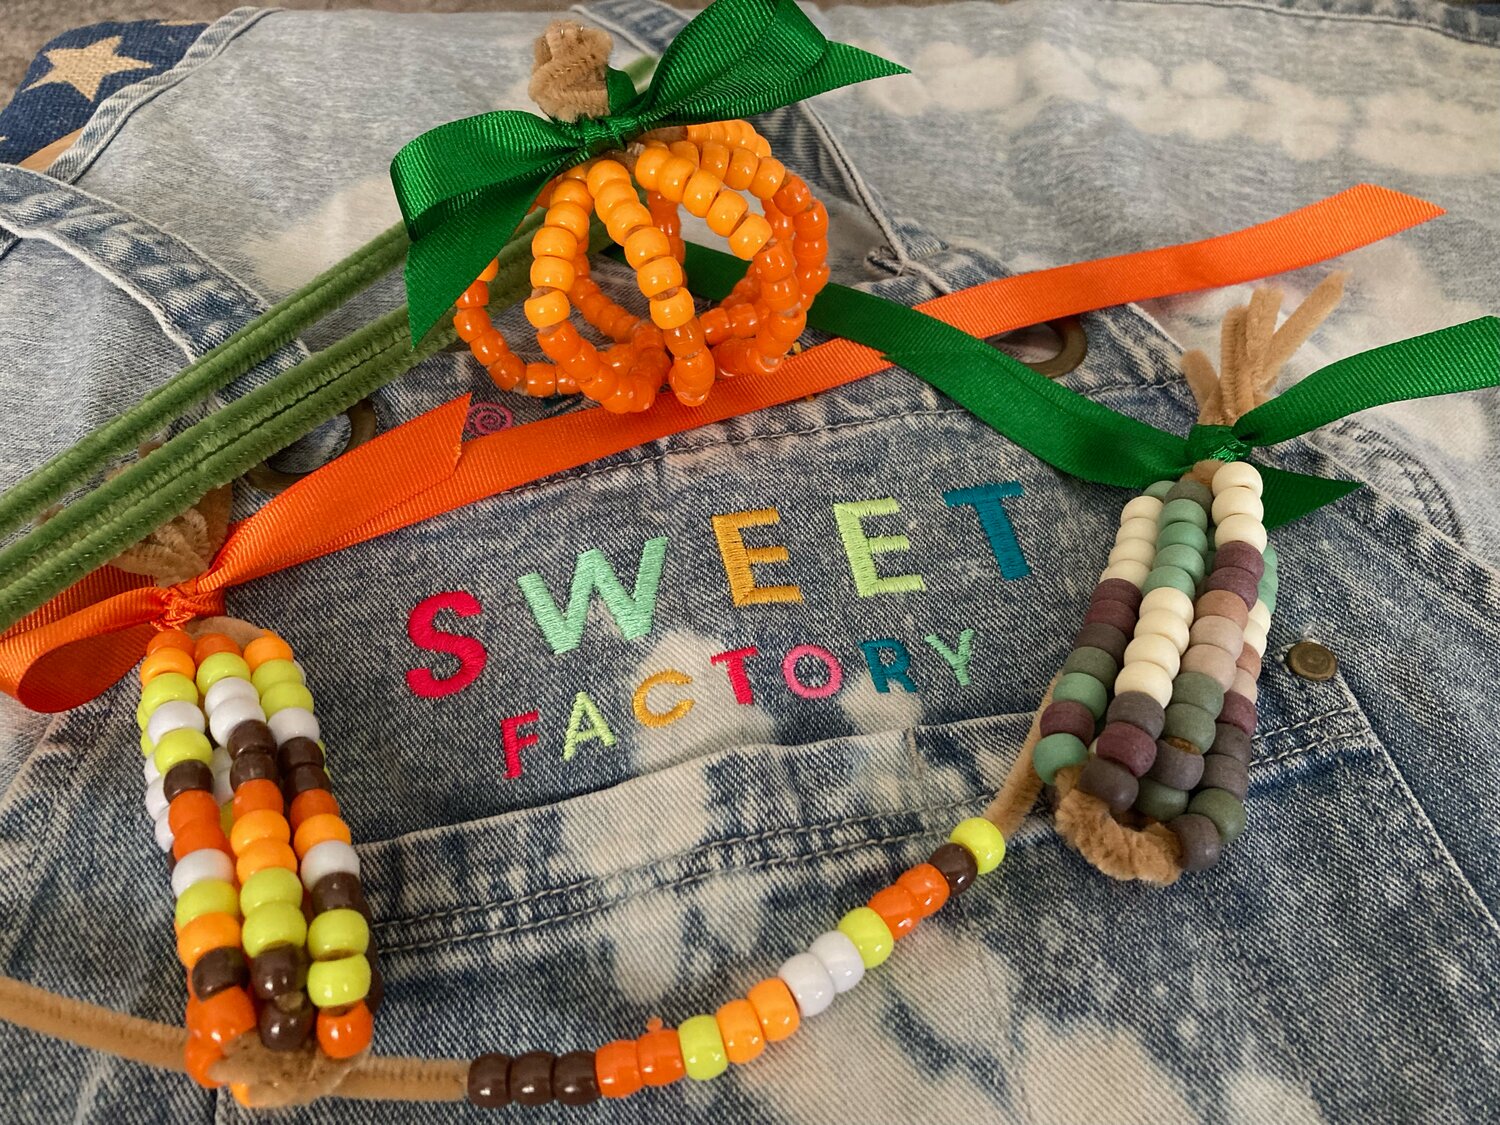 Kids of all ages will have the opportunity to make crafts at a special event set for Nov. 10 at Sweet Factory.